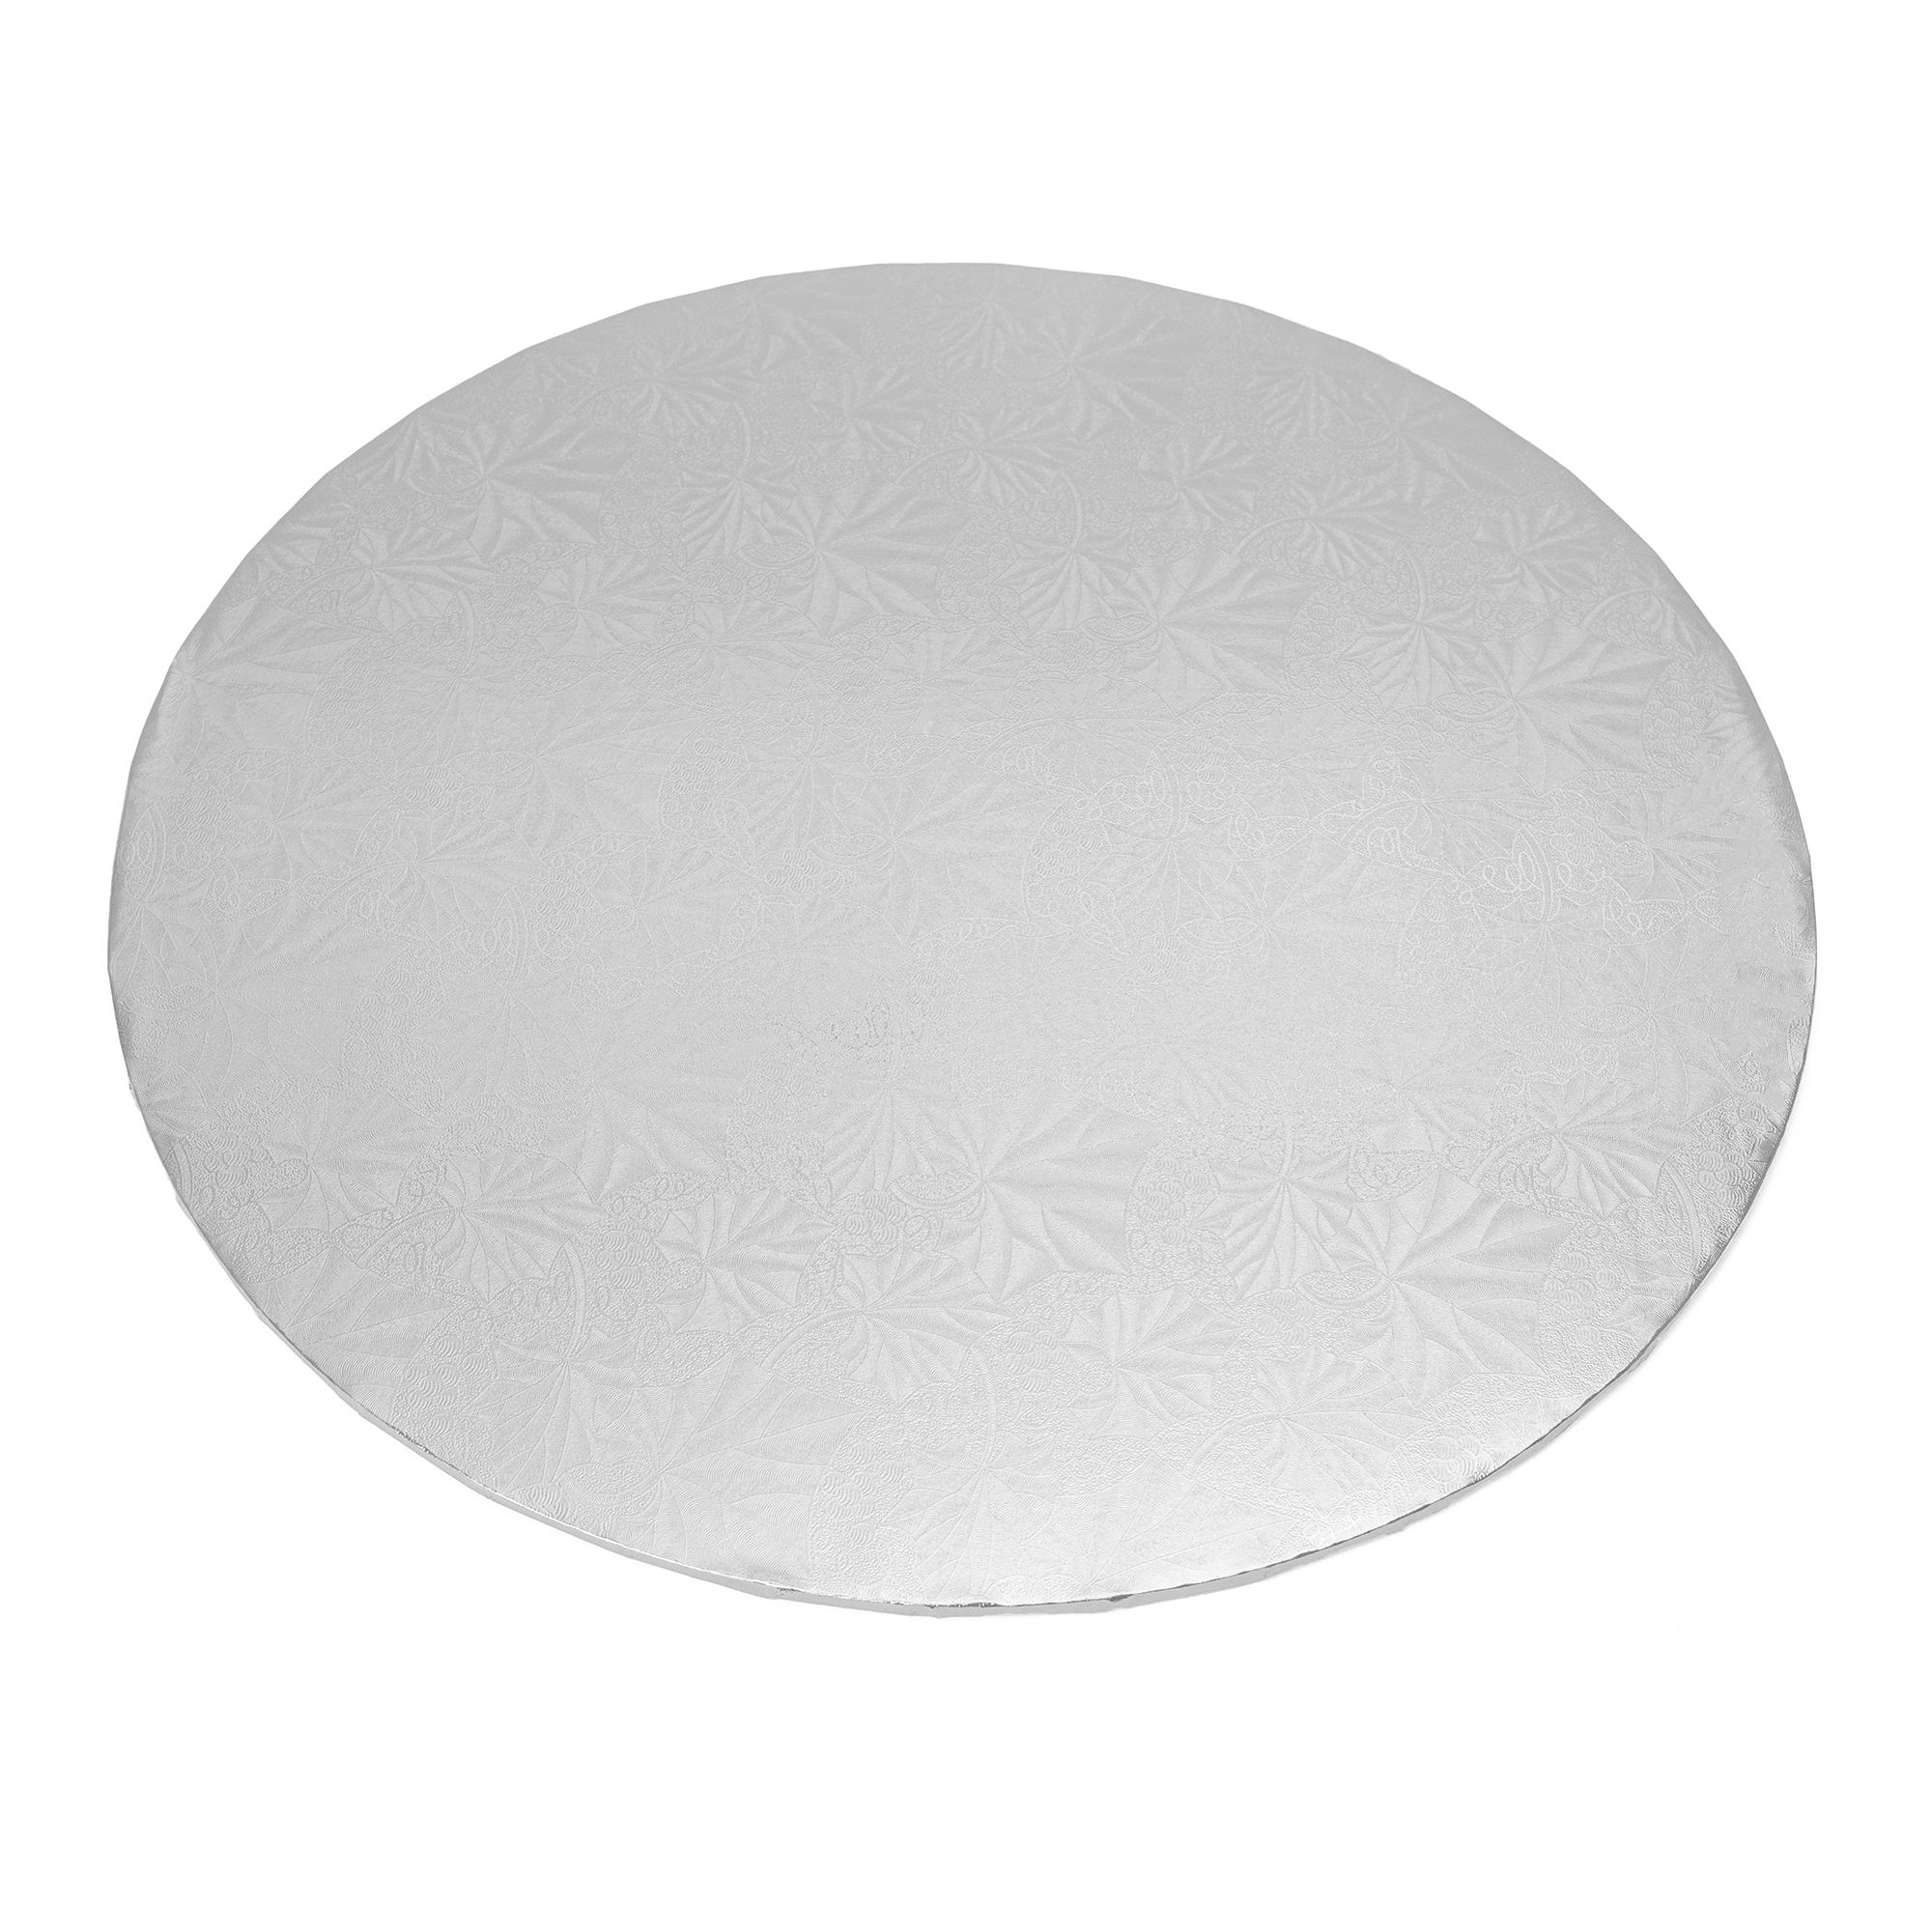 Foil Covered Cake Board 16" 5pc/pack - Silver